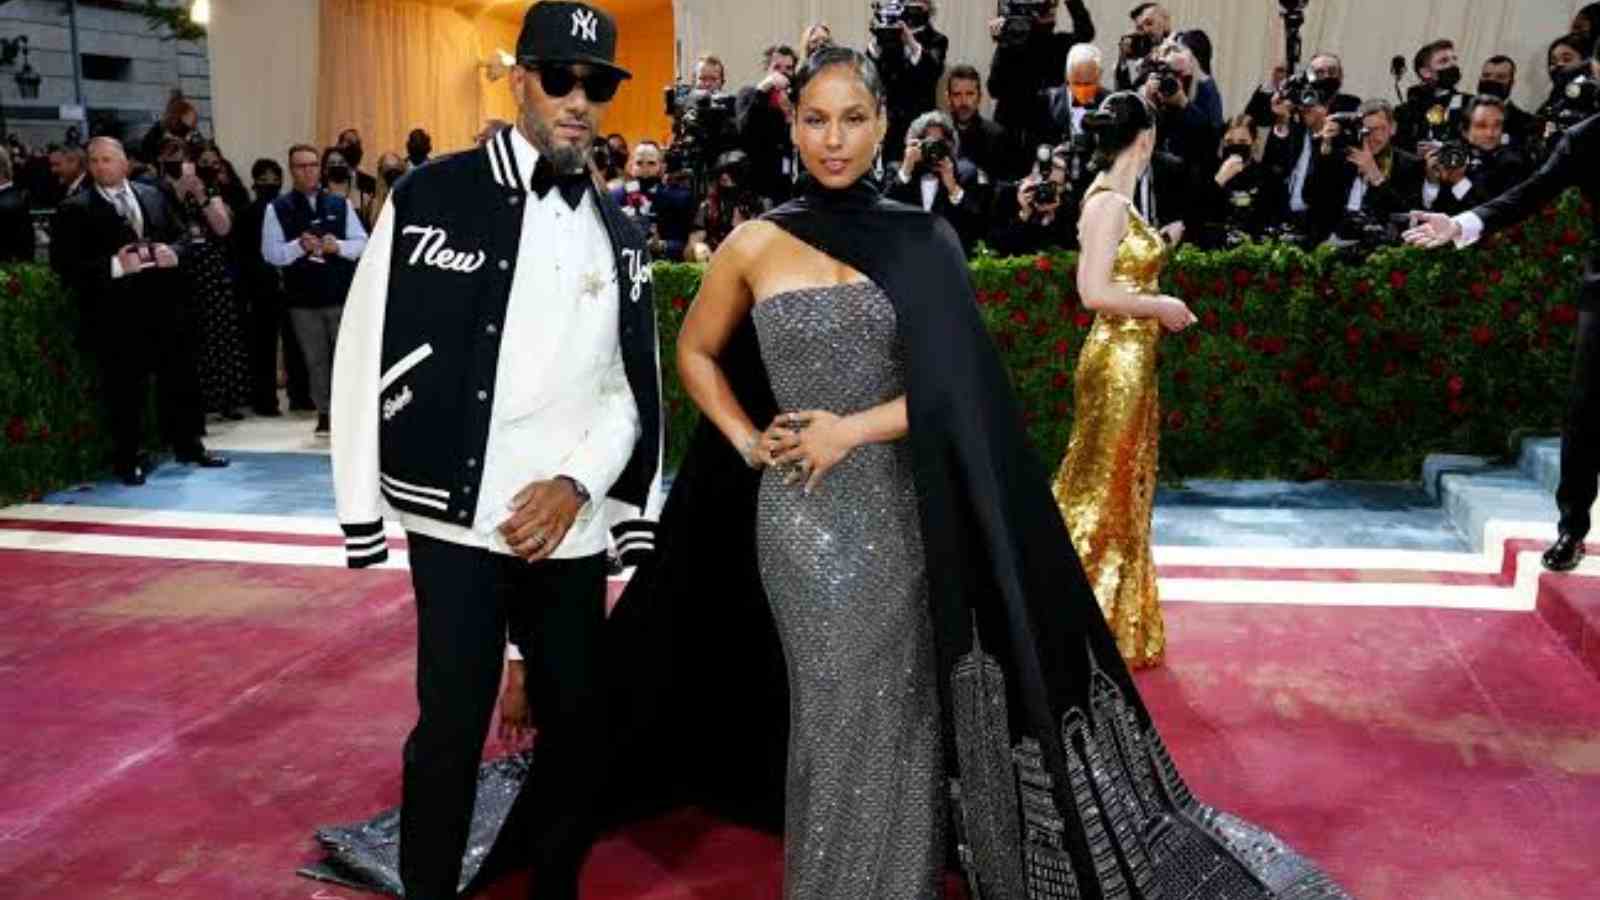 The Swizz Beats and Alicia Keys in Ralph Lauren at the Red Carpet